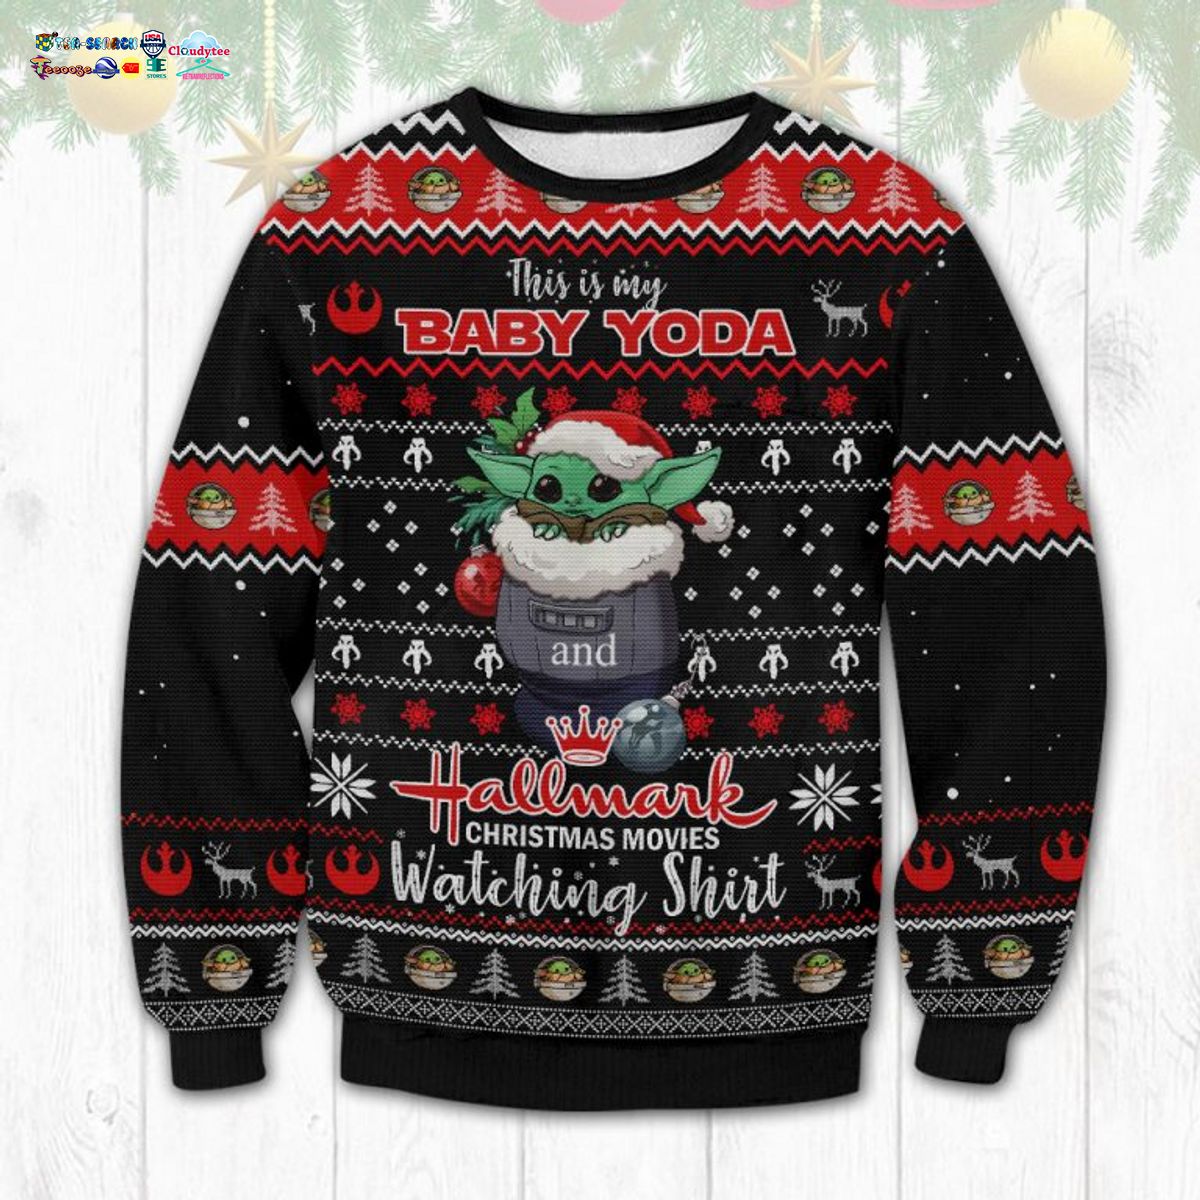 This Is My Baby Yoda And Hallmark Christmas Movies Watching Shirt Ugly Christmas Sweater